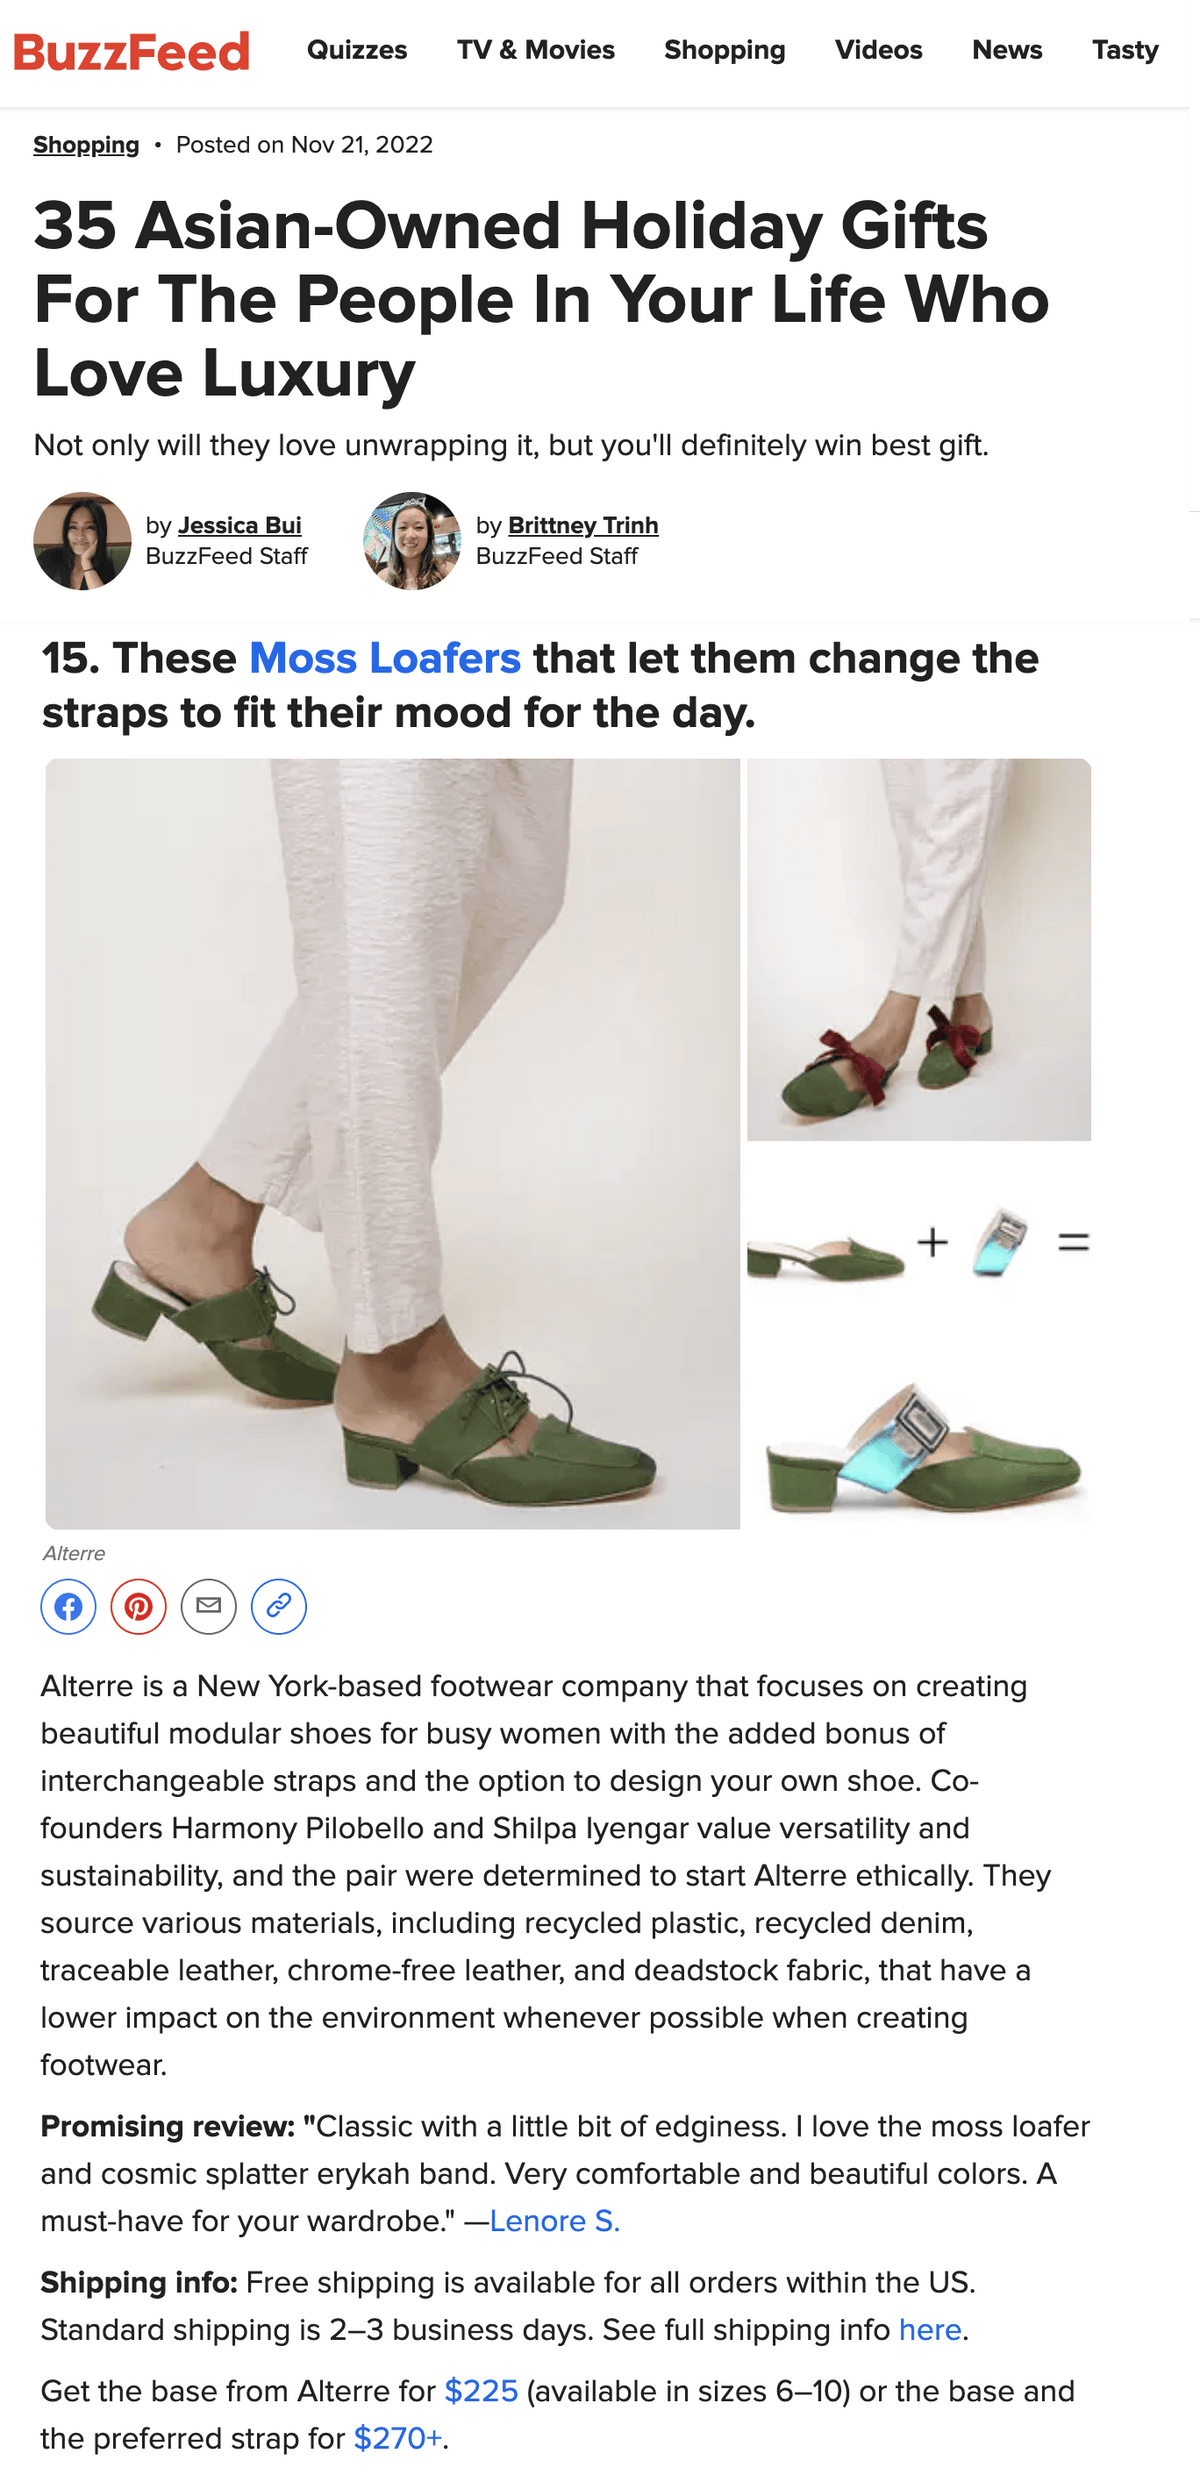 Alterre shoes featured on Buzzfeed - Customizable Moss Loafers